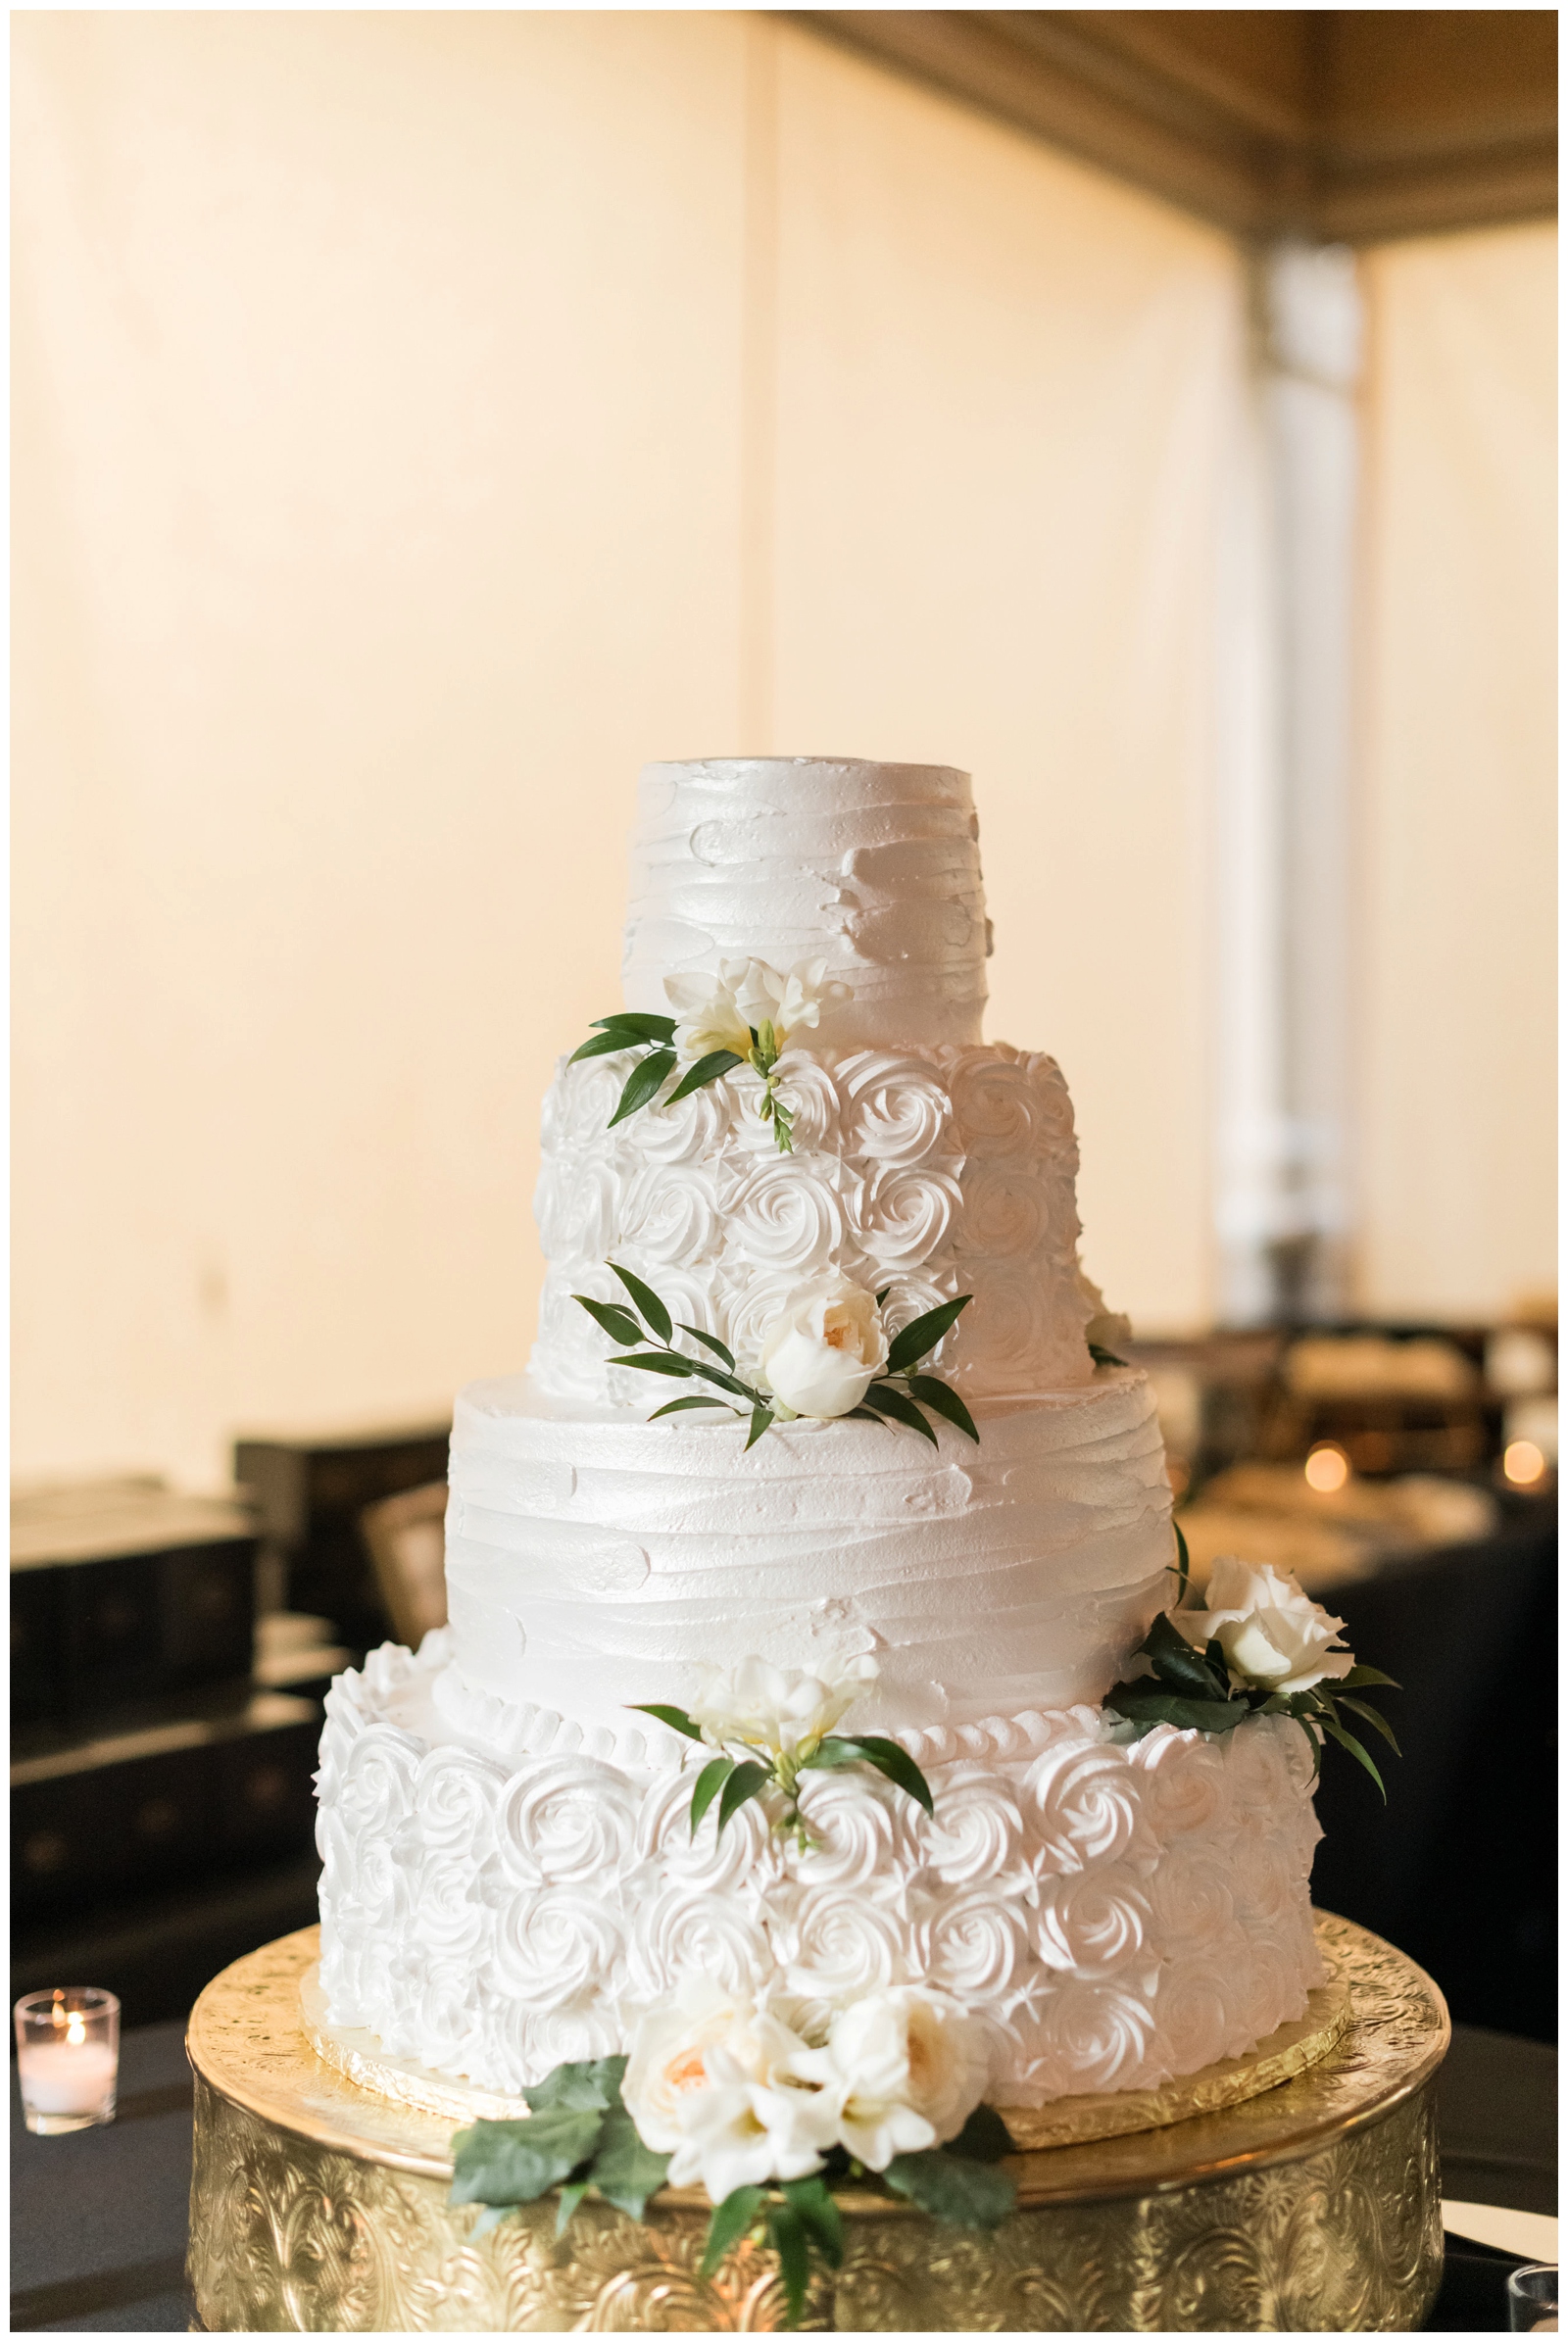 four tiered wedding cake with ivory rose accents photographed by Pipers Photography